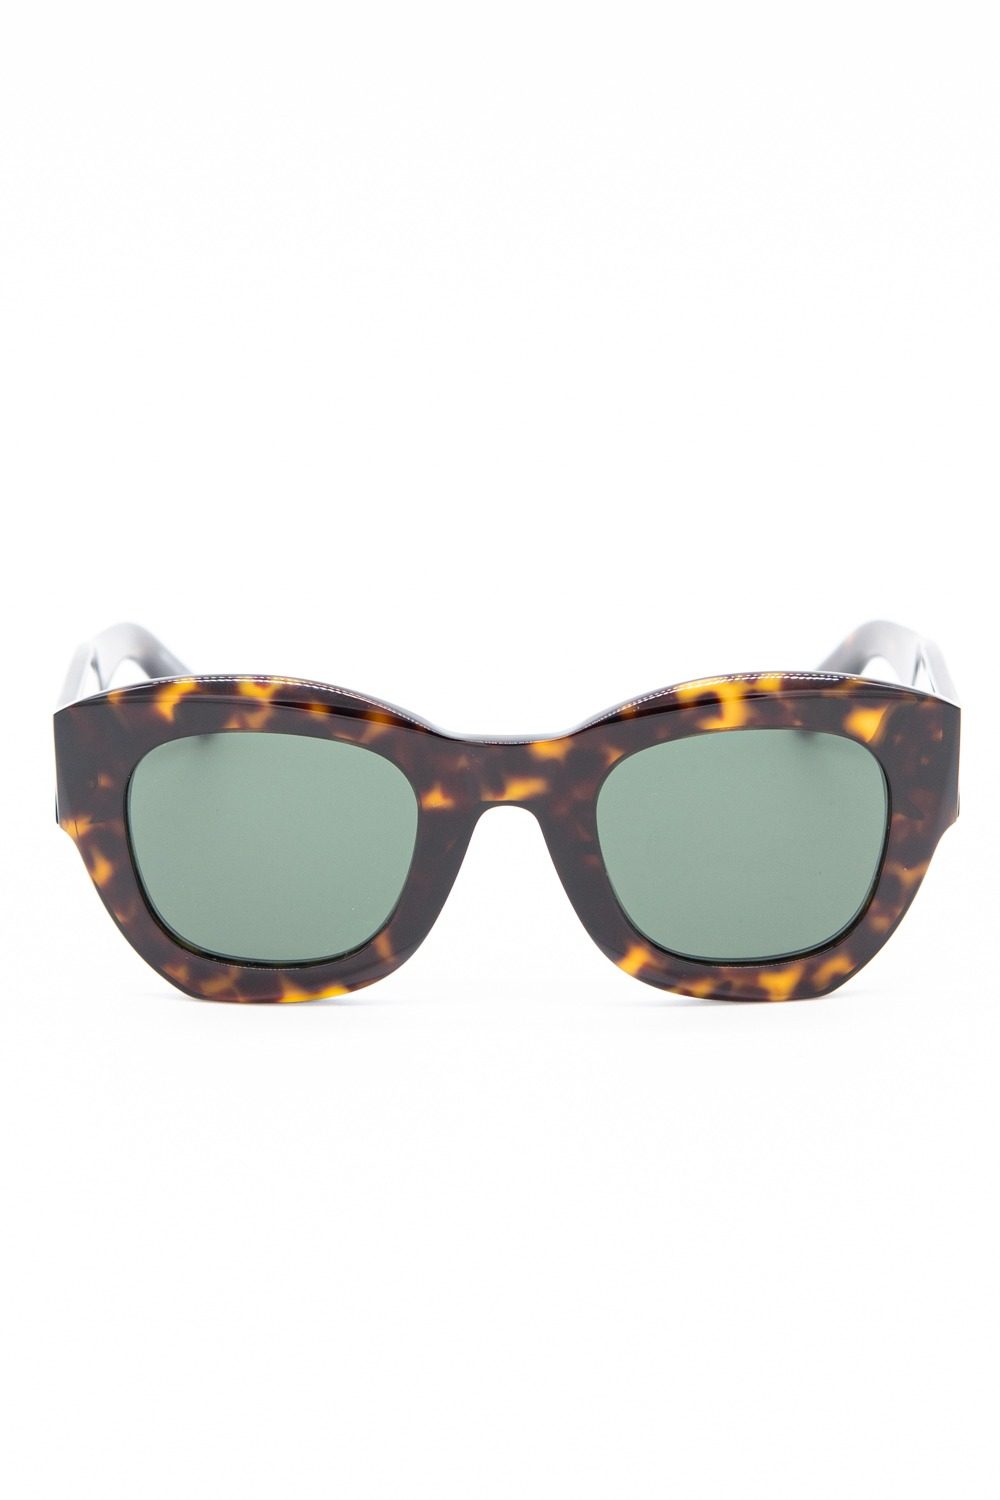 Thumbnail of http://Givenchy%20Sonnenbrille%20in%20Dunkelbraun